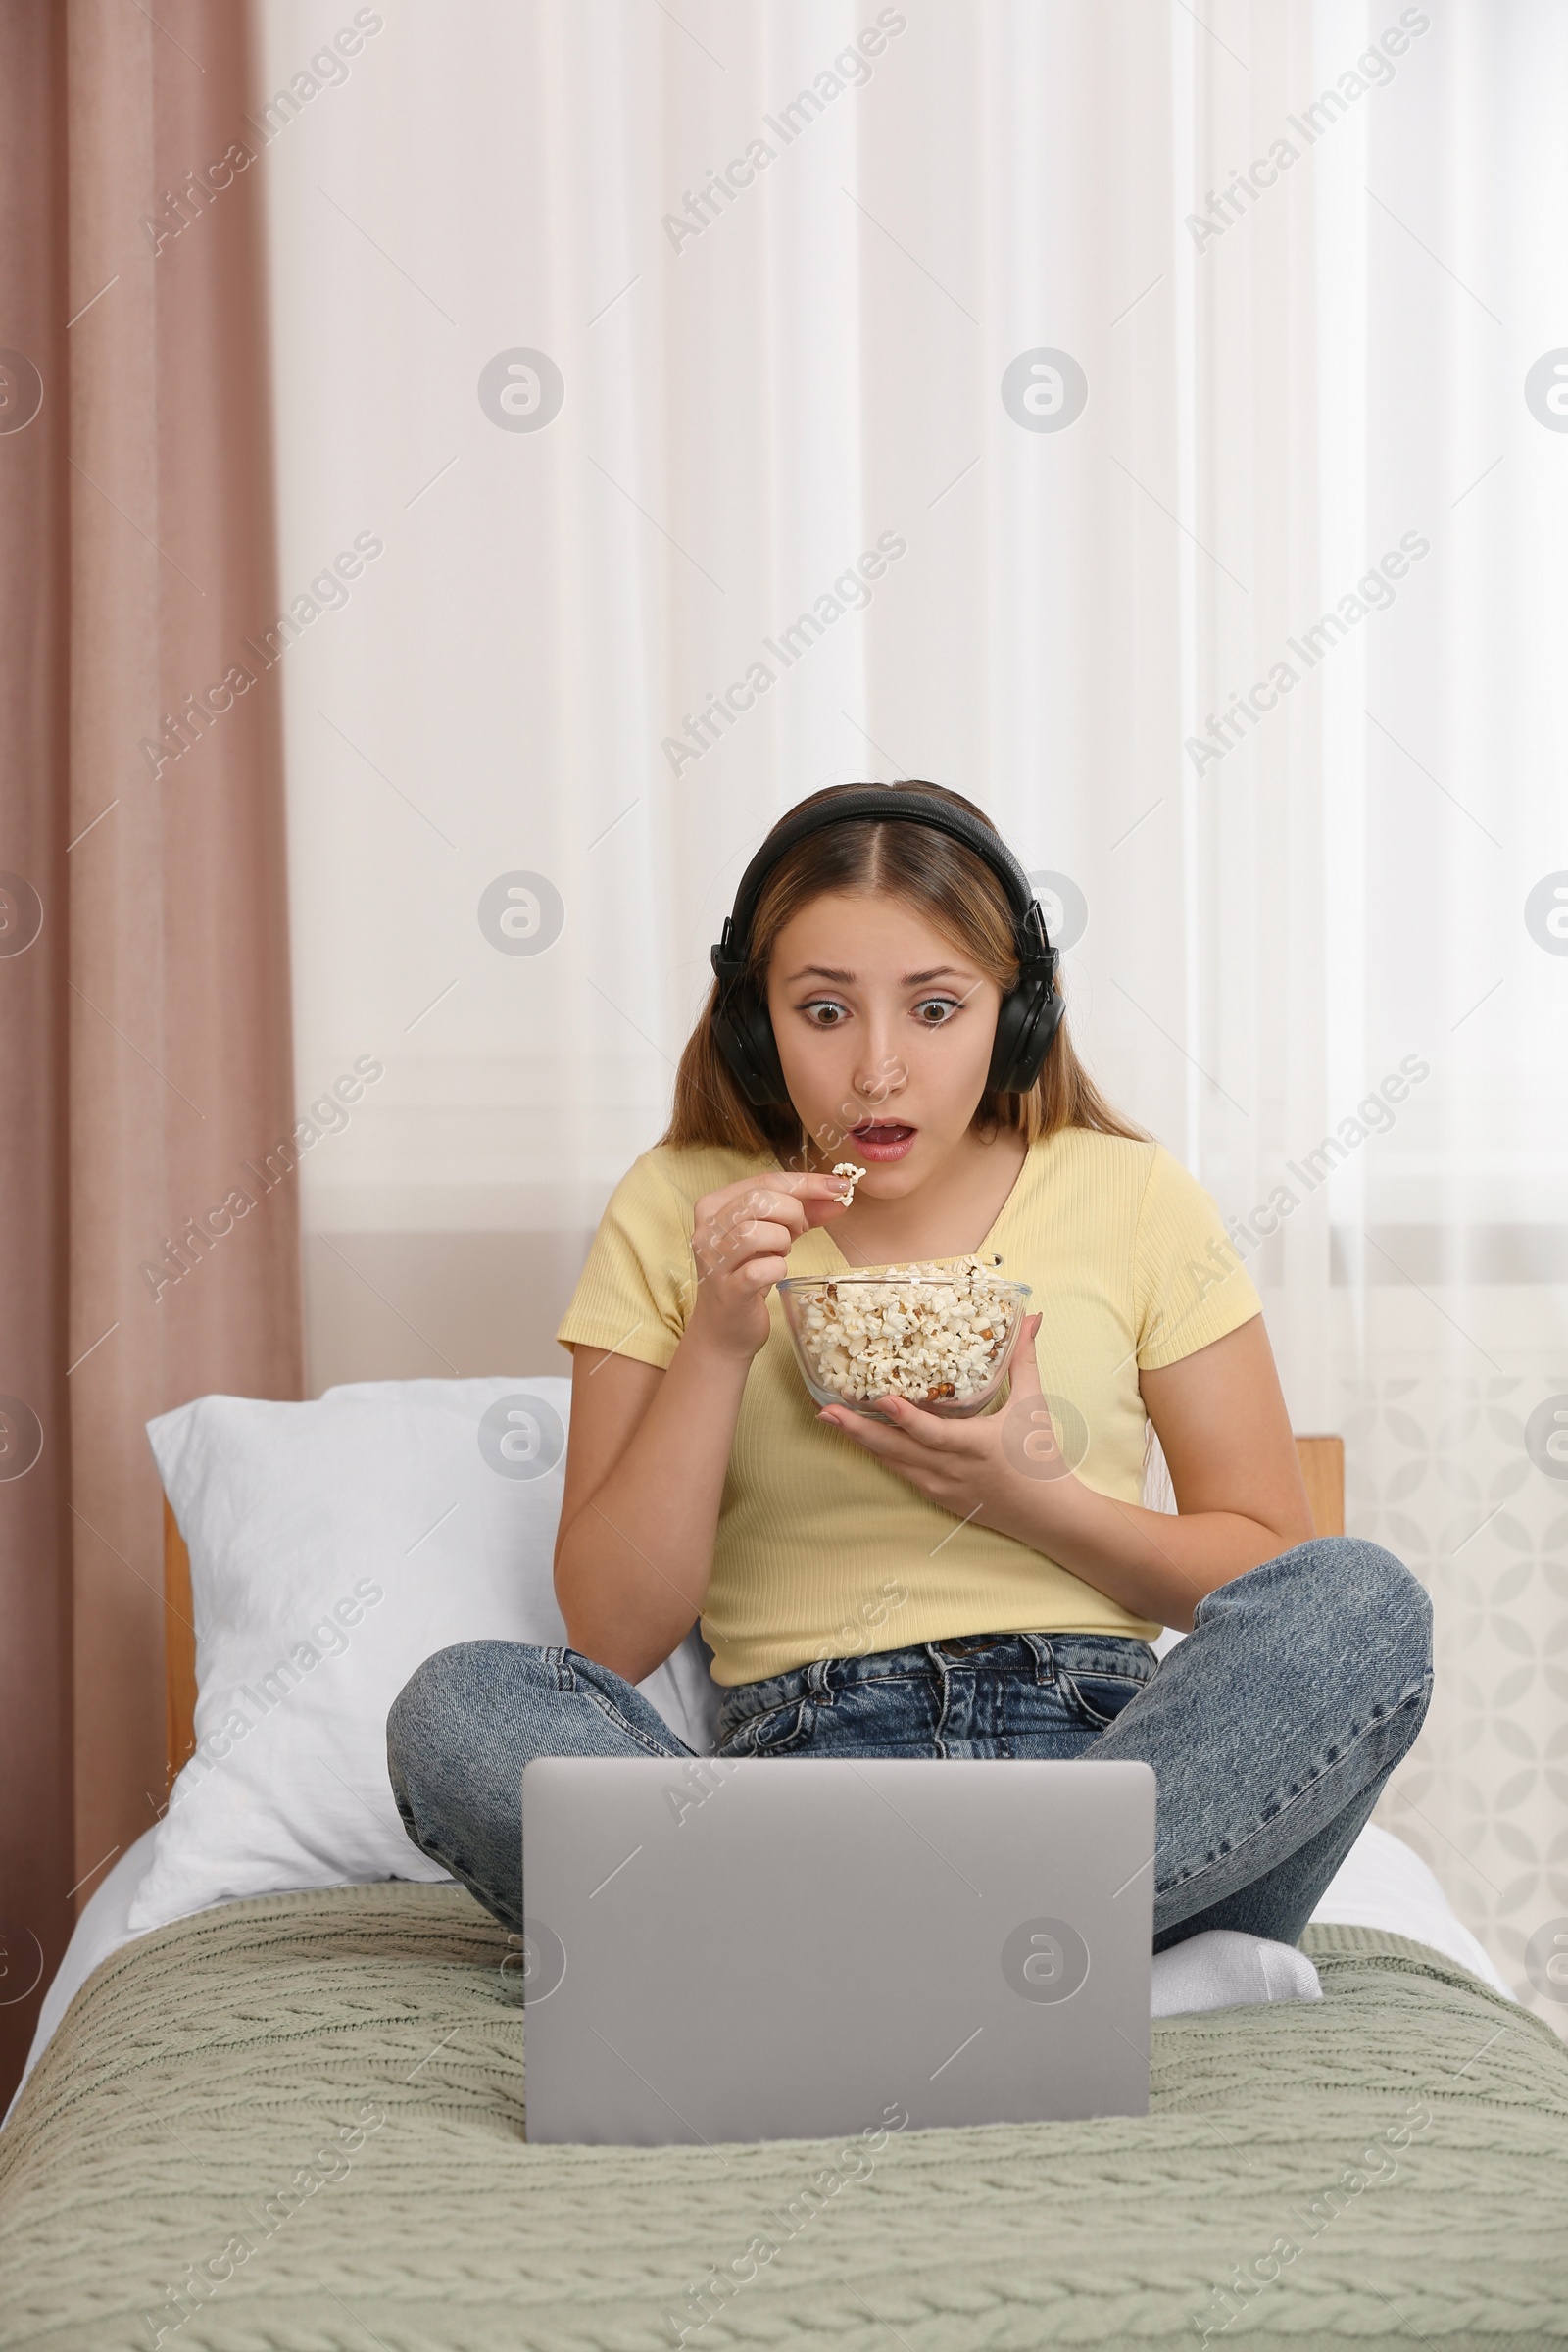 Photo of Teenage girl with headphones eating popcorn while using laptop on bed at home